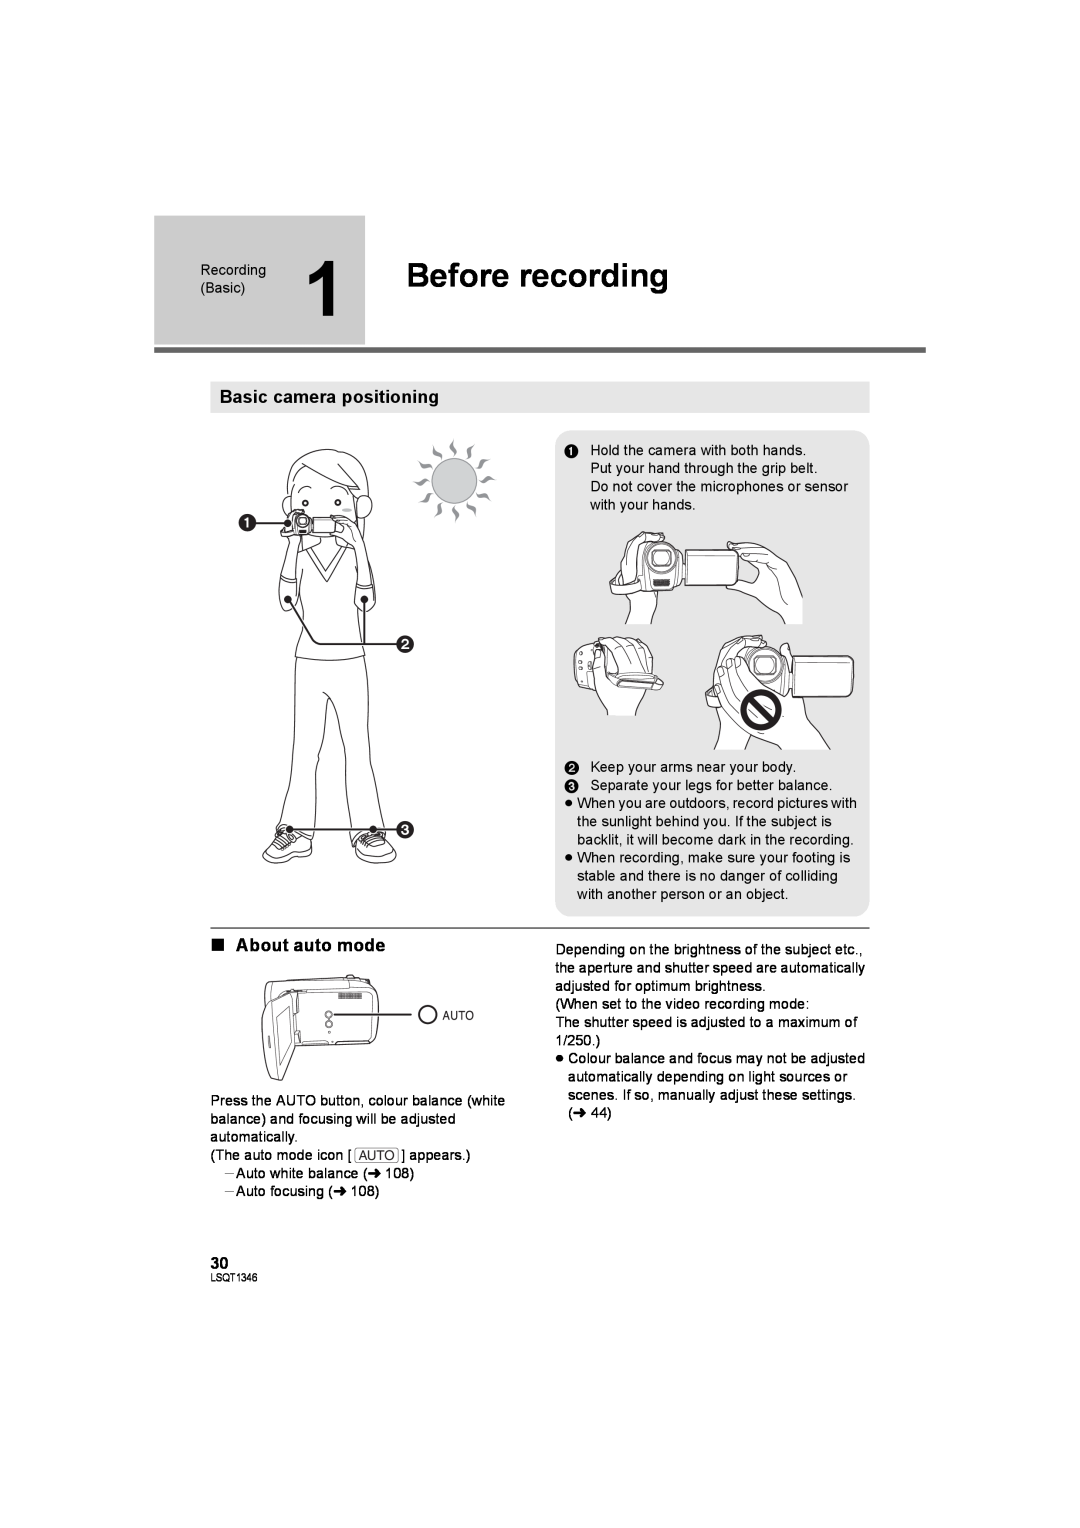 Panasonic SDR-H50 operating instructions Before recording, Basic camera positioning, ∫ About auto mode 